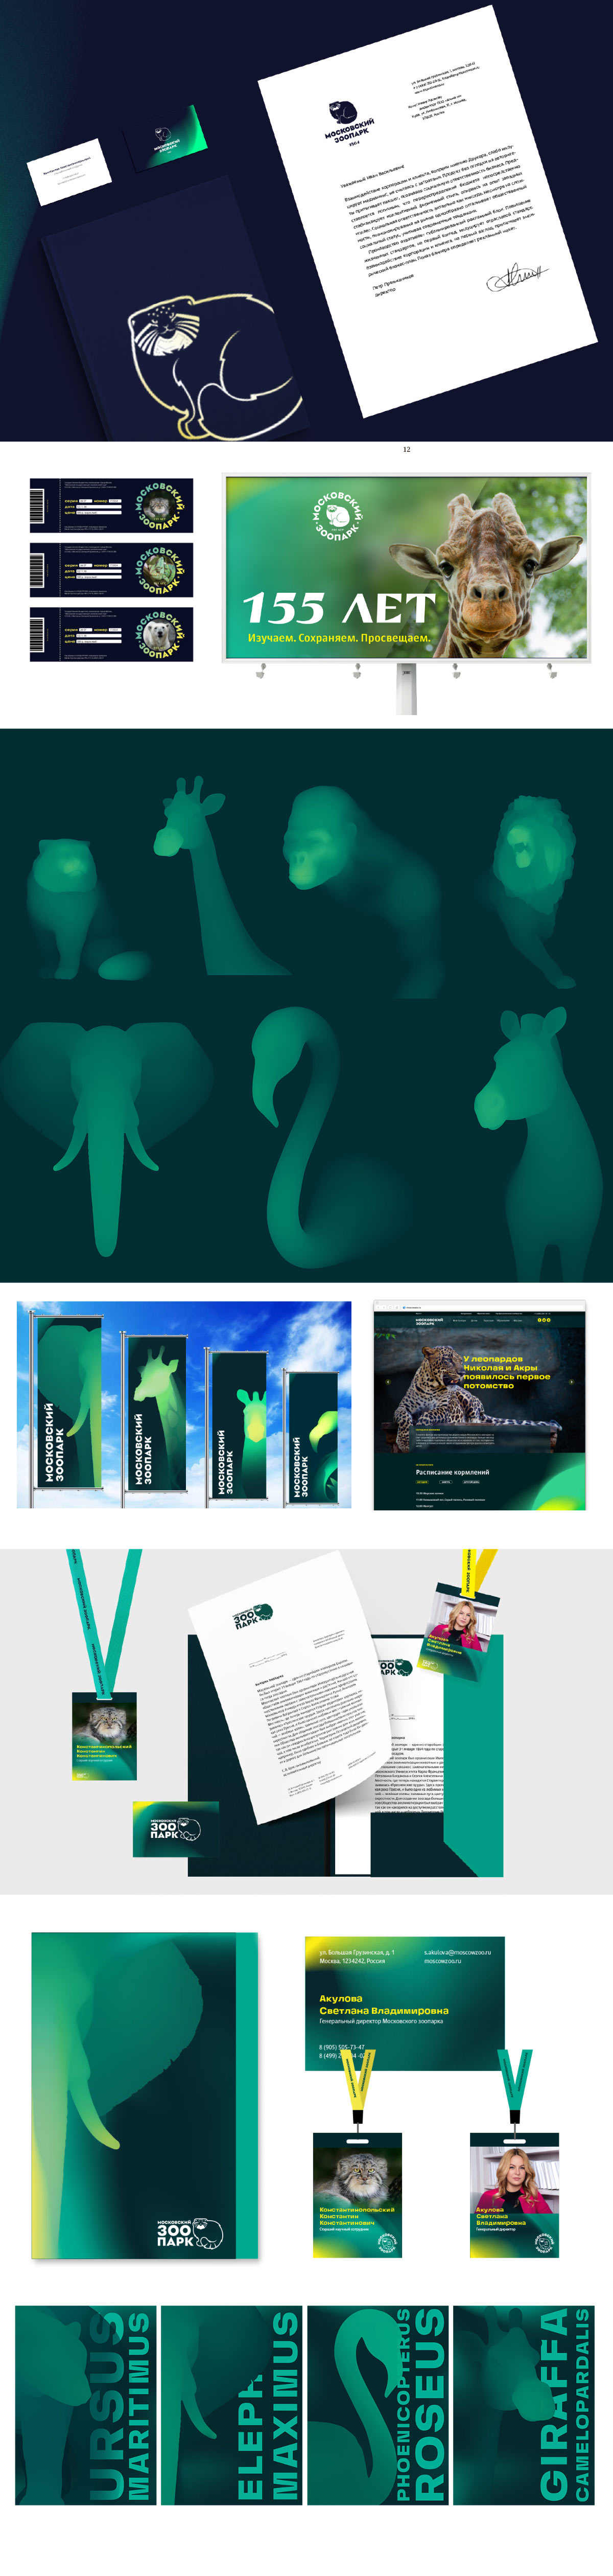 moscow zoo identity process 01